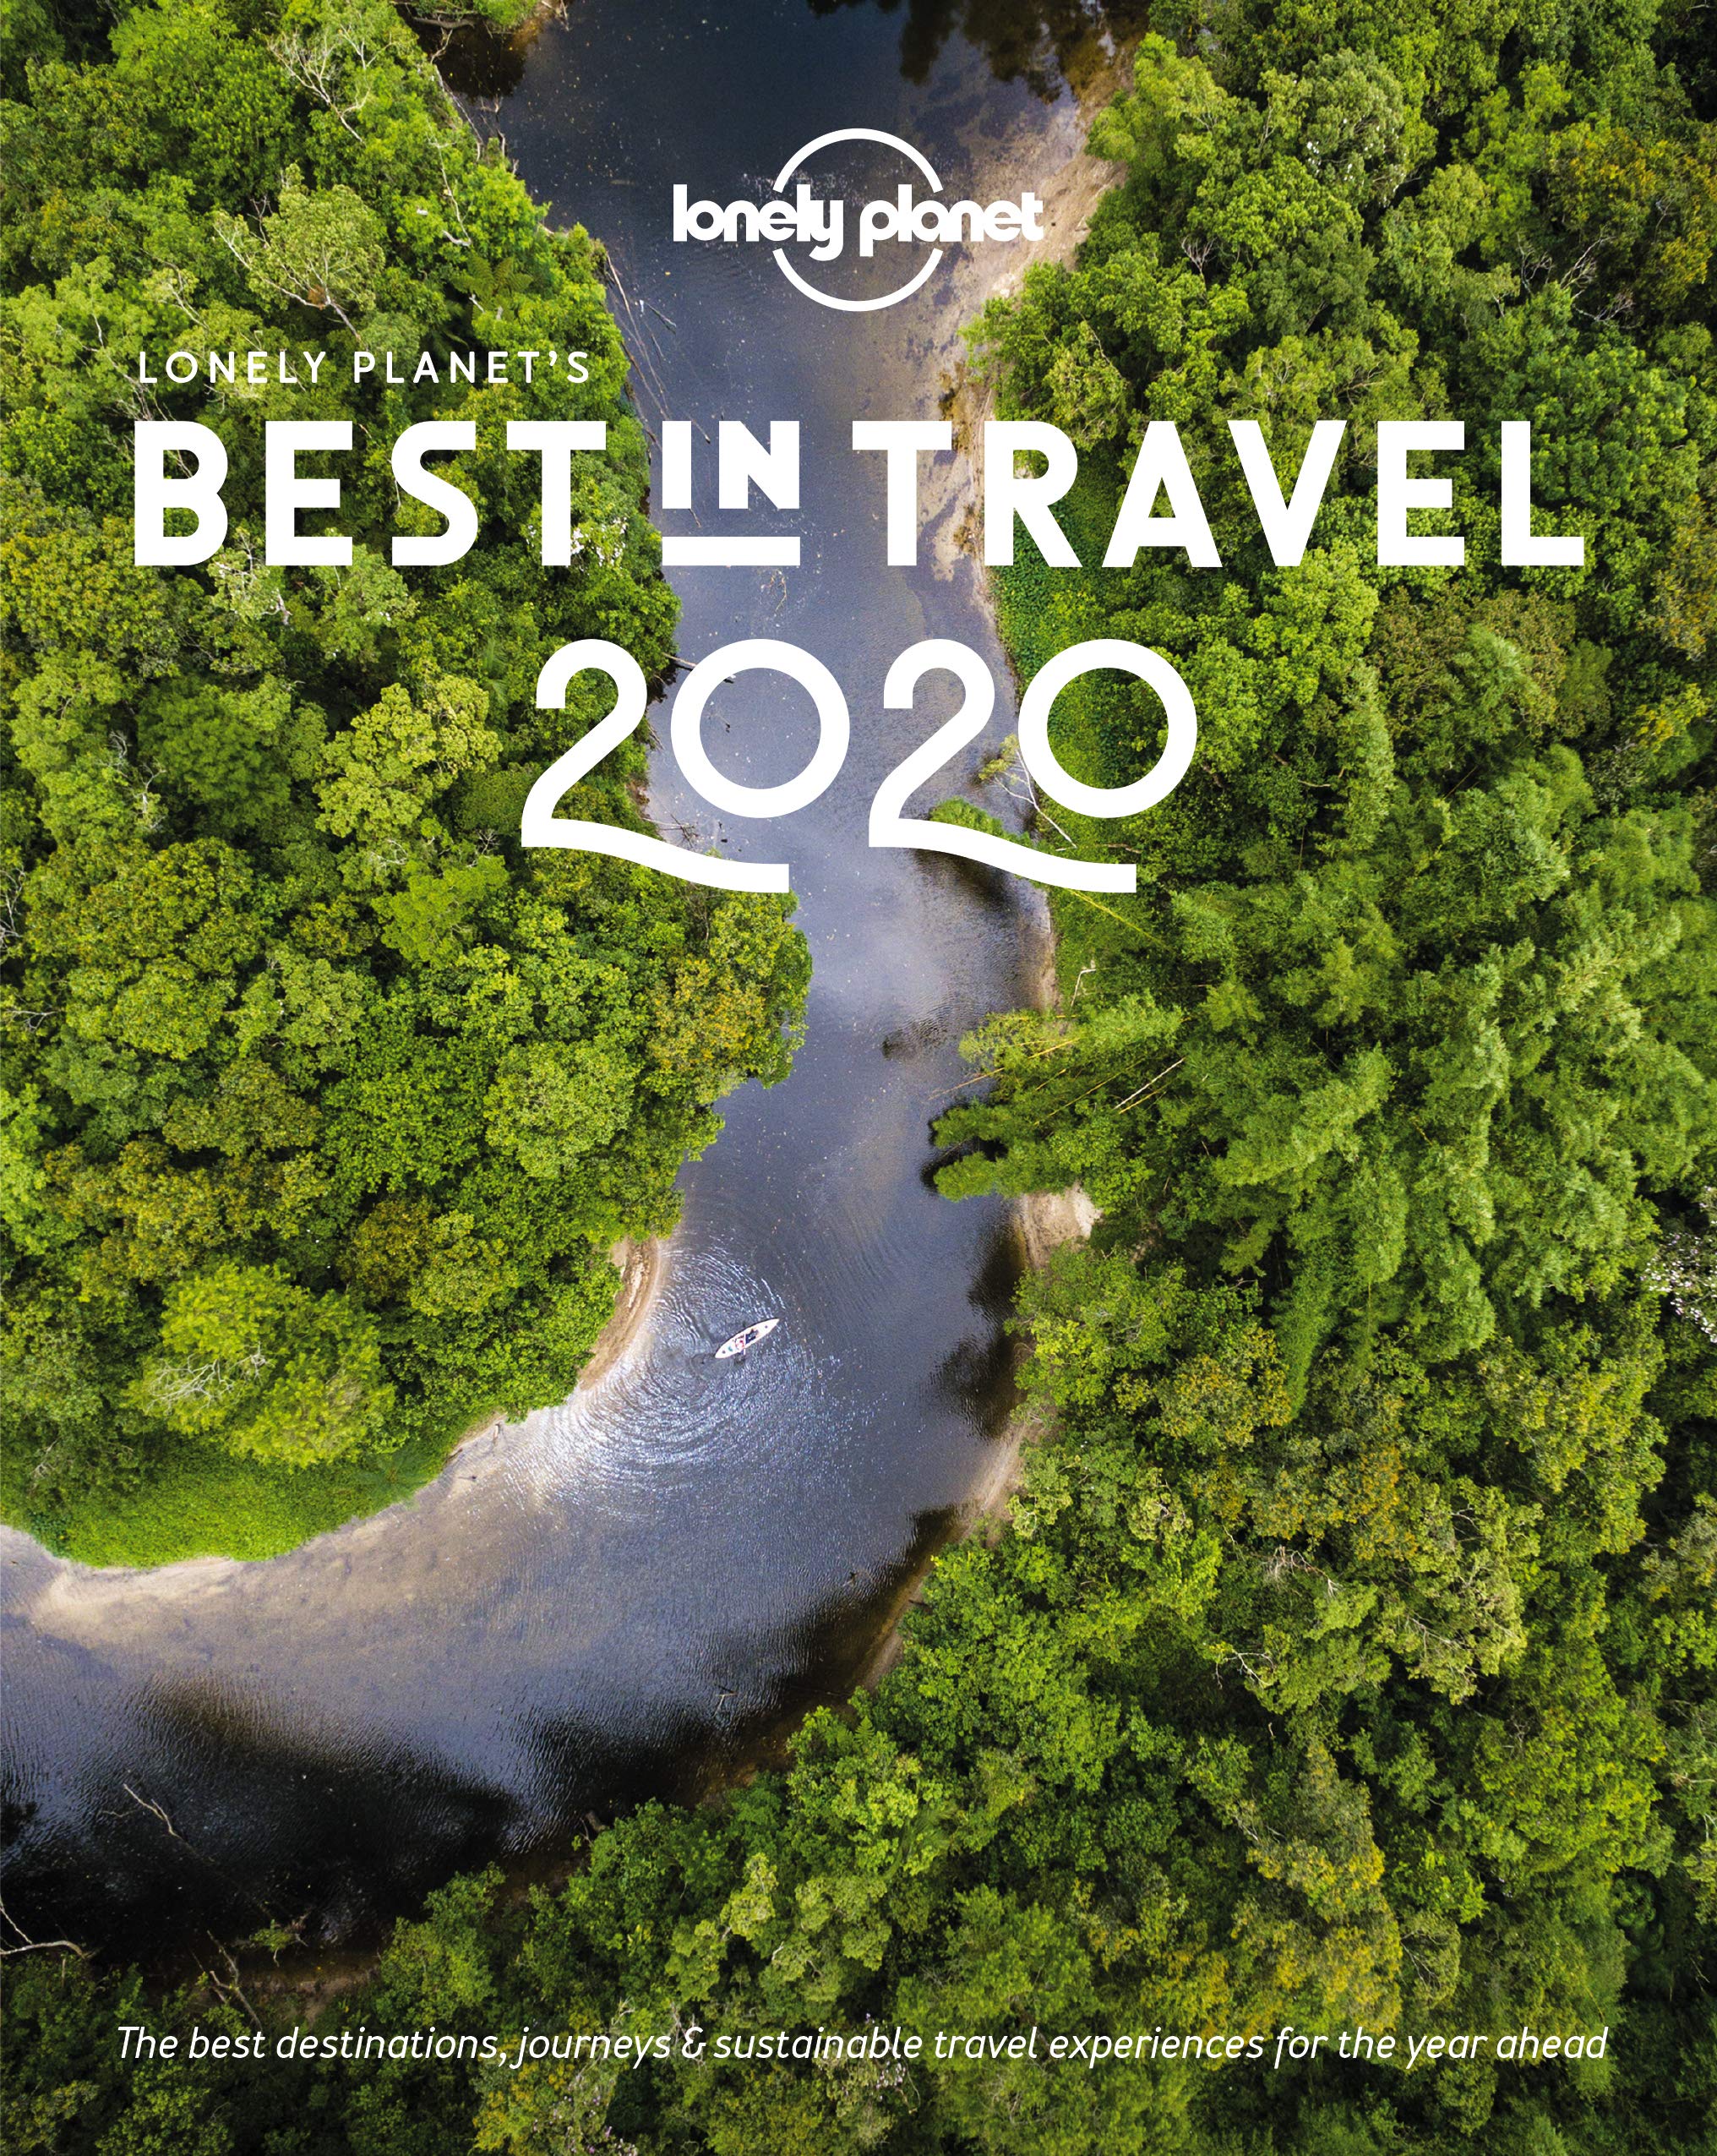 lonely-planet-s-best-in-travel-2020-lonely-planet